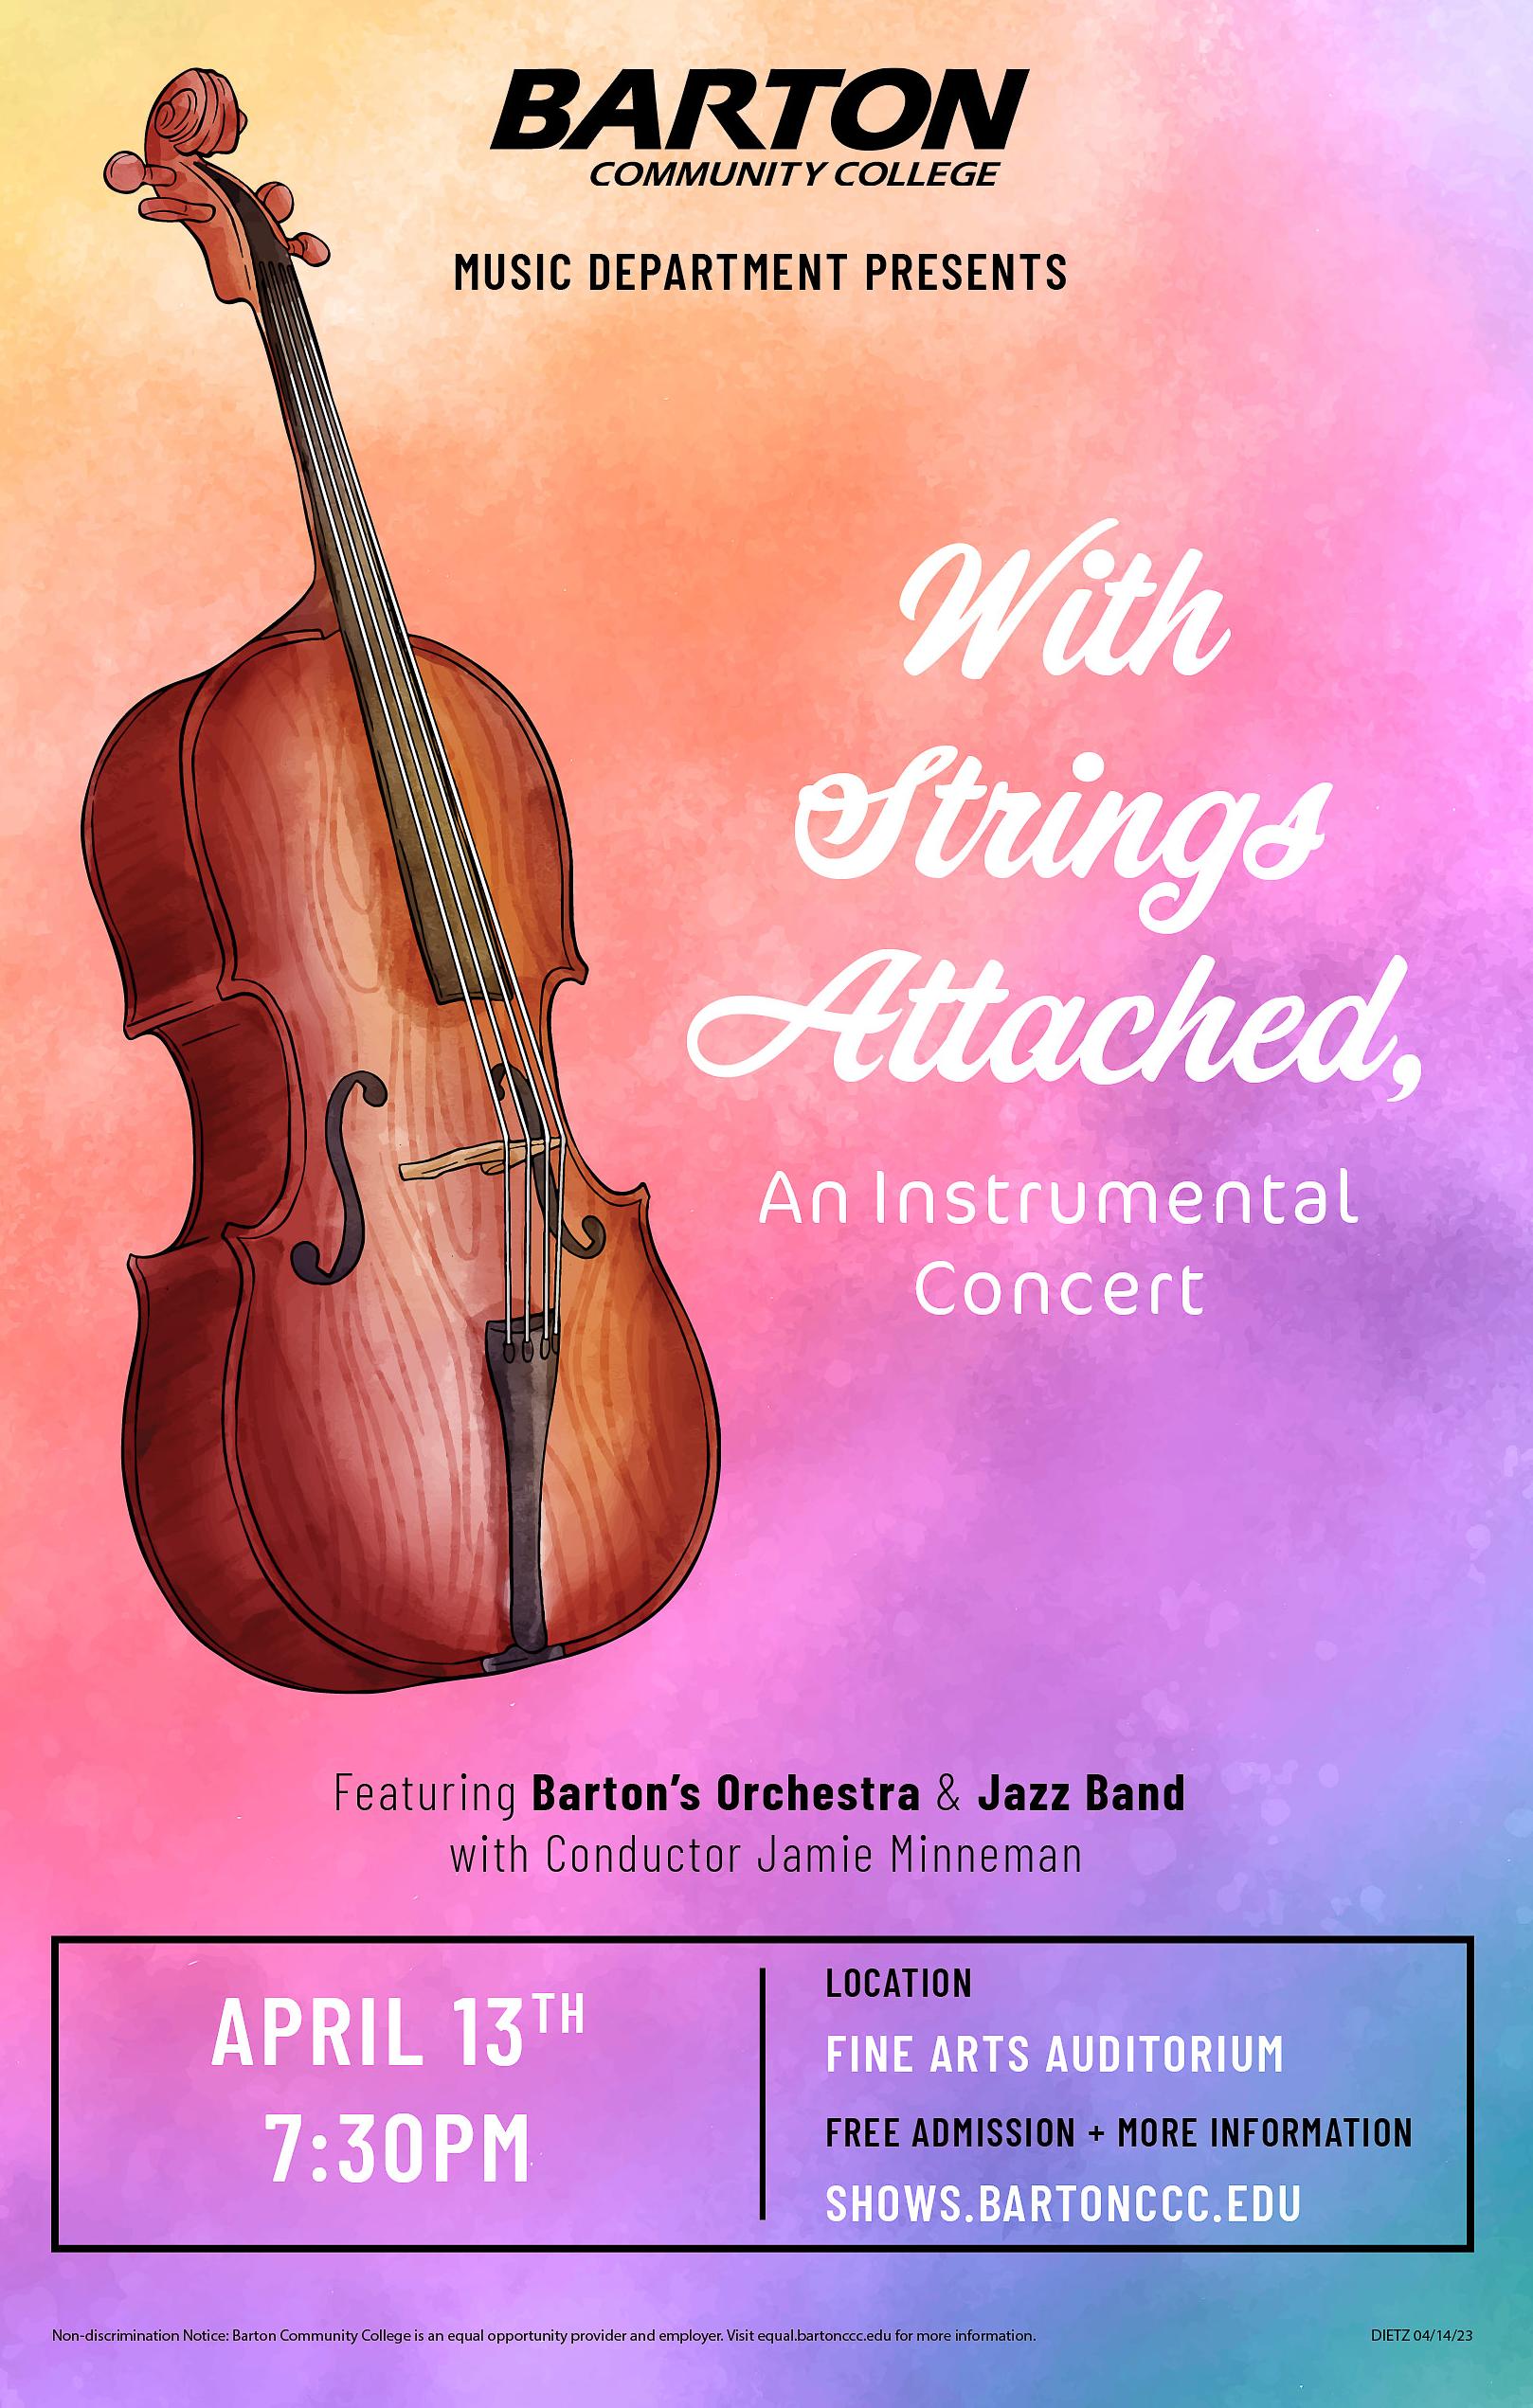 brightly colored event poster with a cello on it